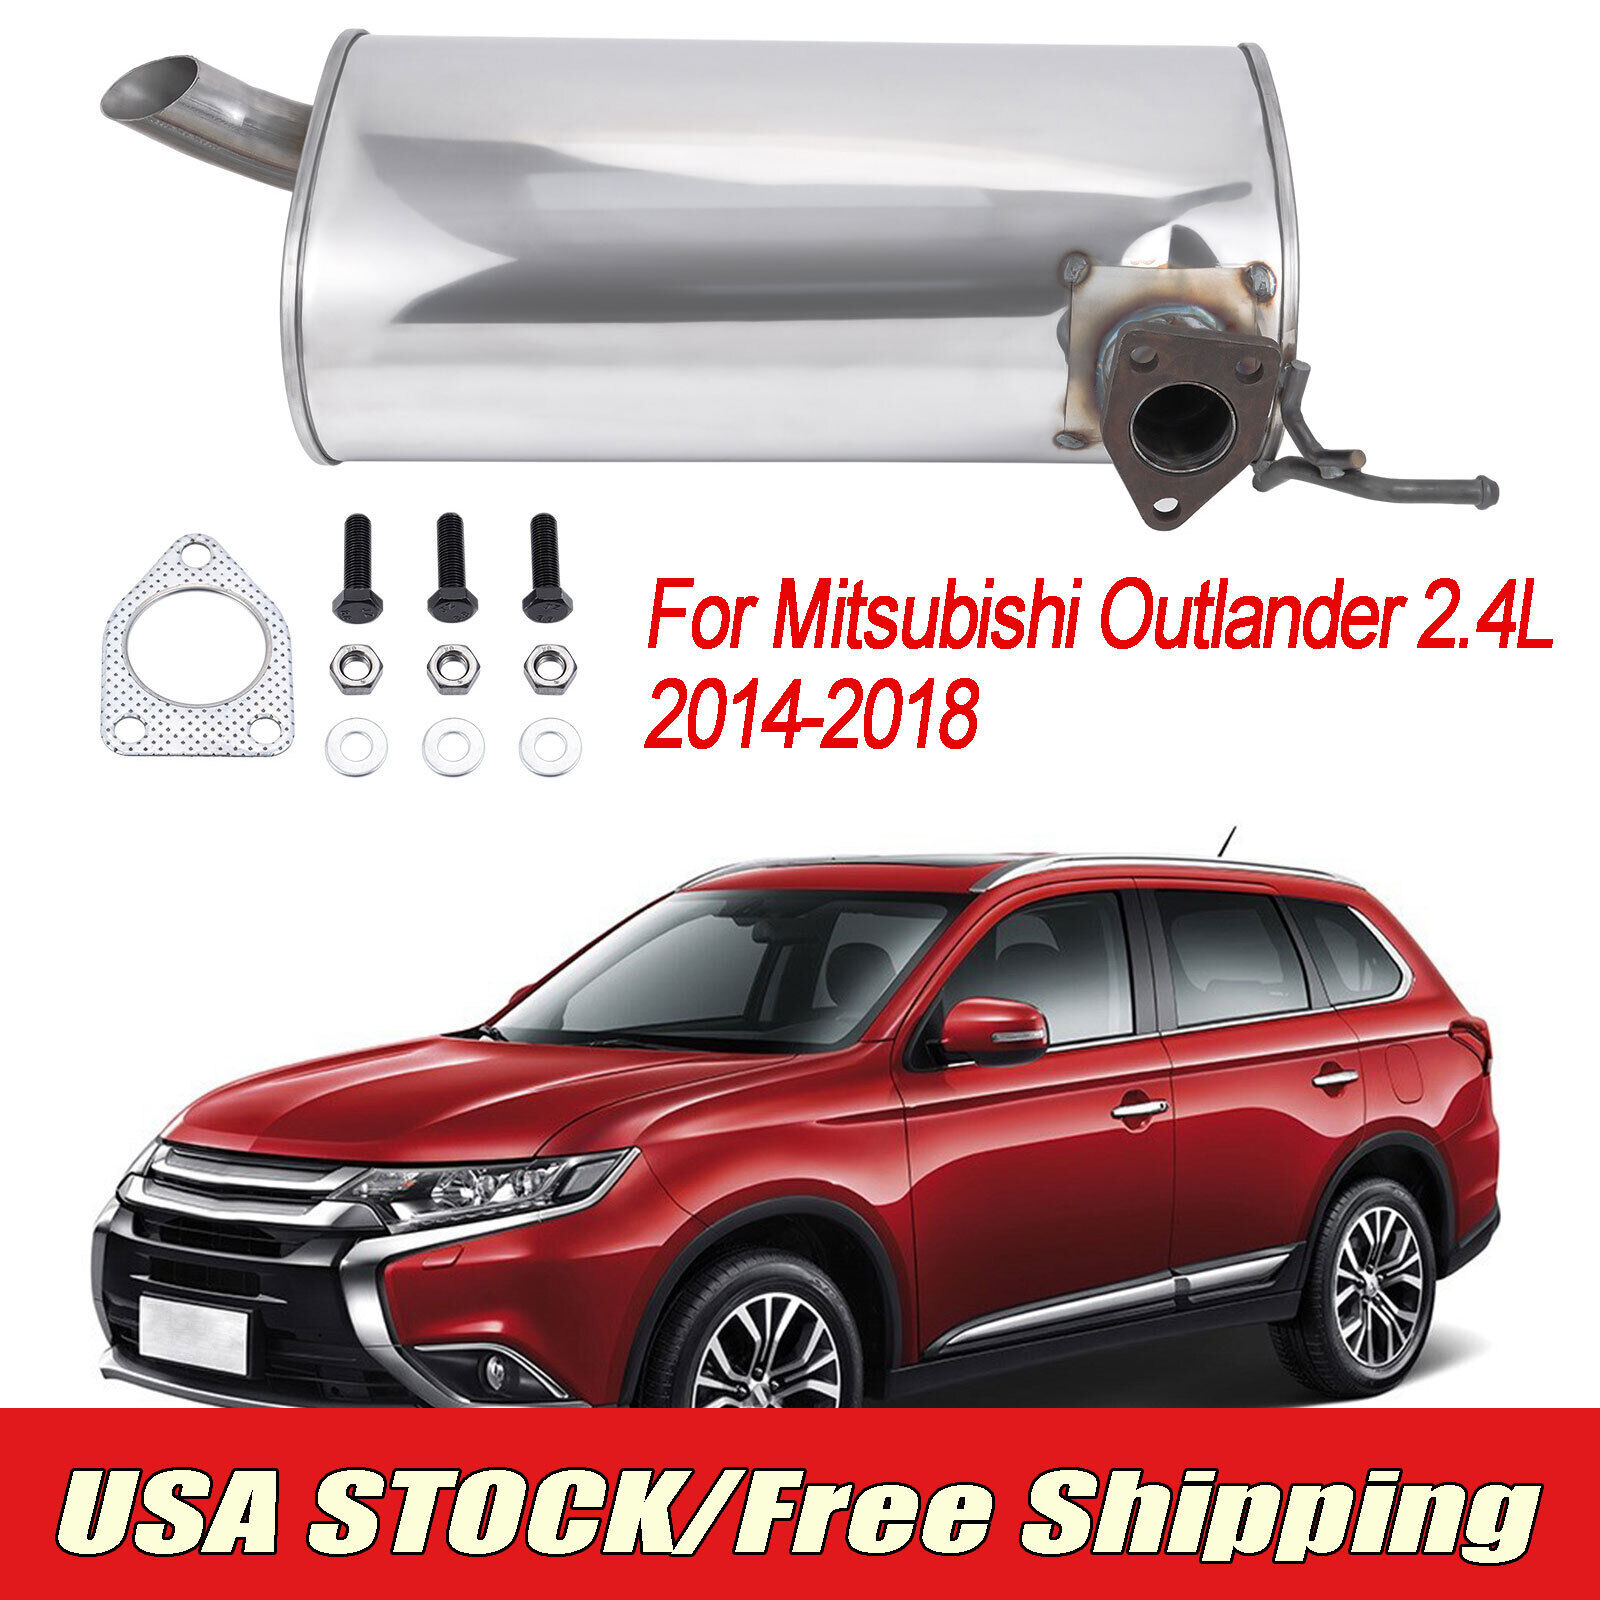 Muffler For Mitsubishi Outlander 2.4L with Single Tail 2014 2015 2016 2017 2018